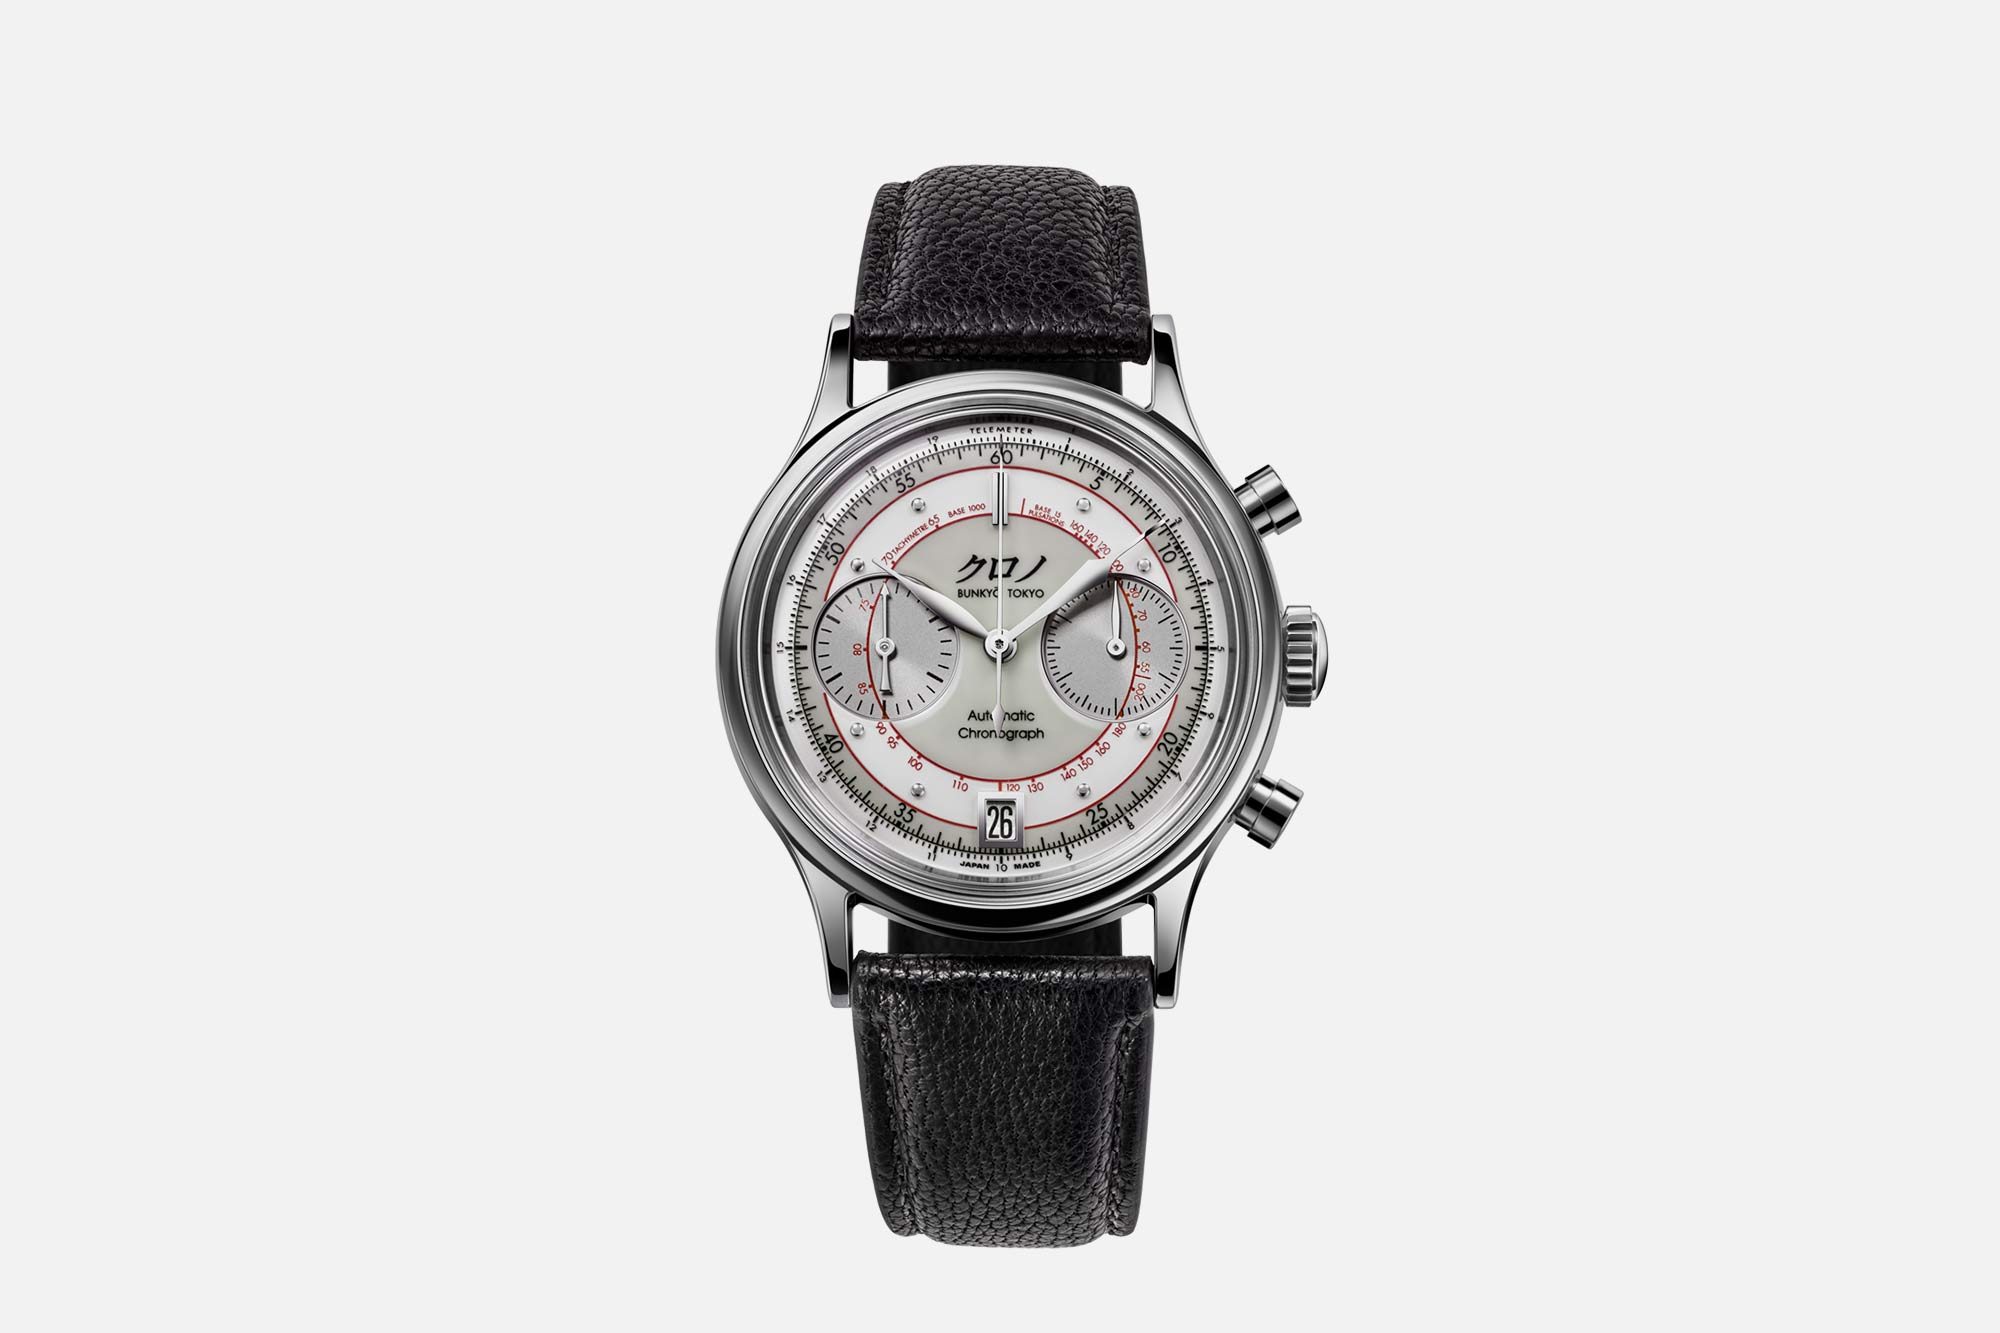 The Latest From Kurono is a White Dialed Chronograph with Lots of Great Art Deco Detail